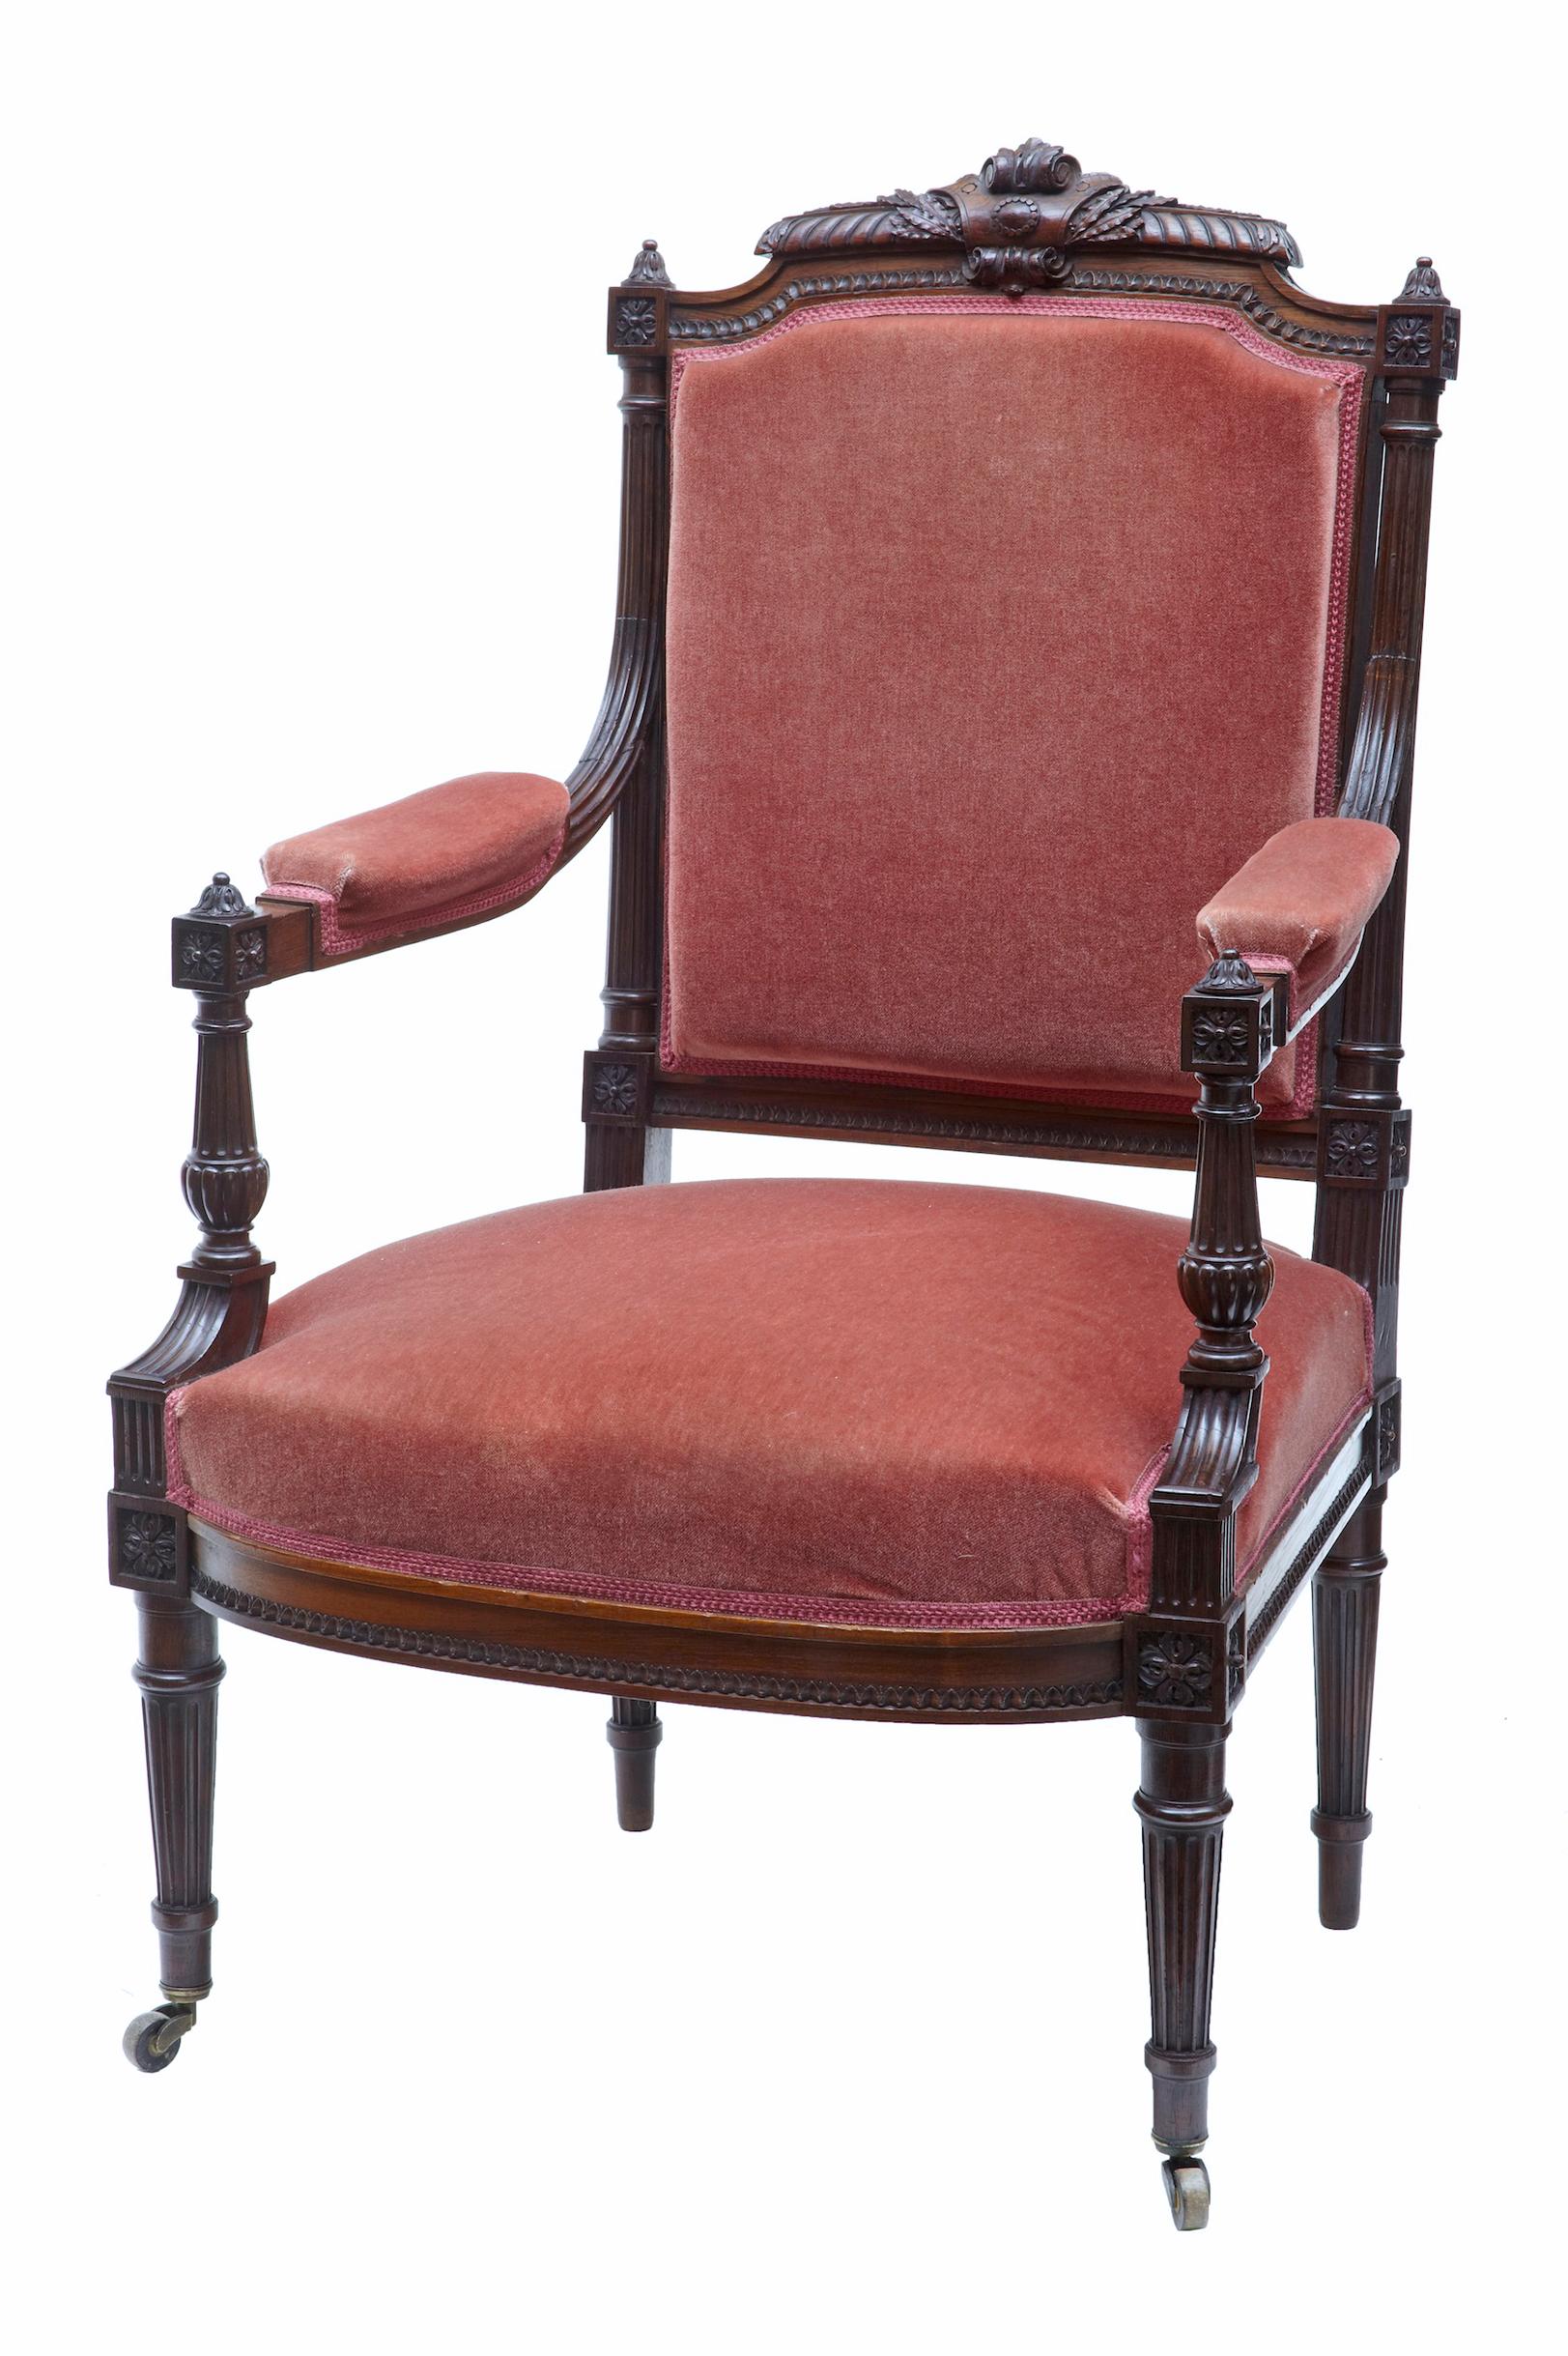 Beautiful carved solid rosewood armchair, circa 1870.

Finely carved back rest of the highest standard, fluted arms lead to the arm rest cushions. Arms supported by turned supports, and further carving to the rail. Standing on fluted legs with